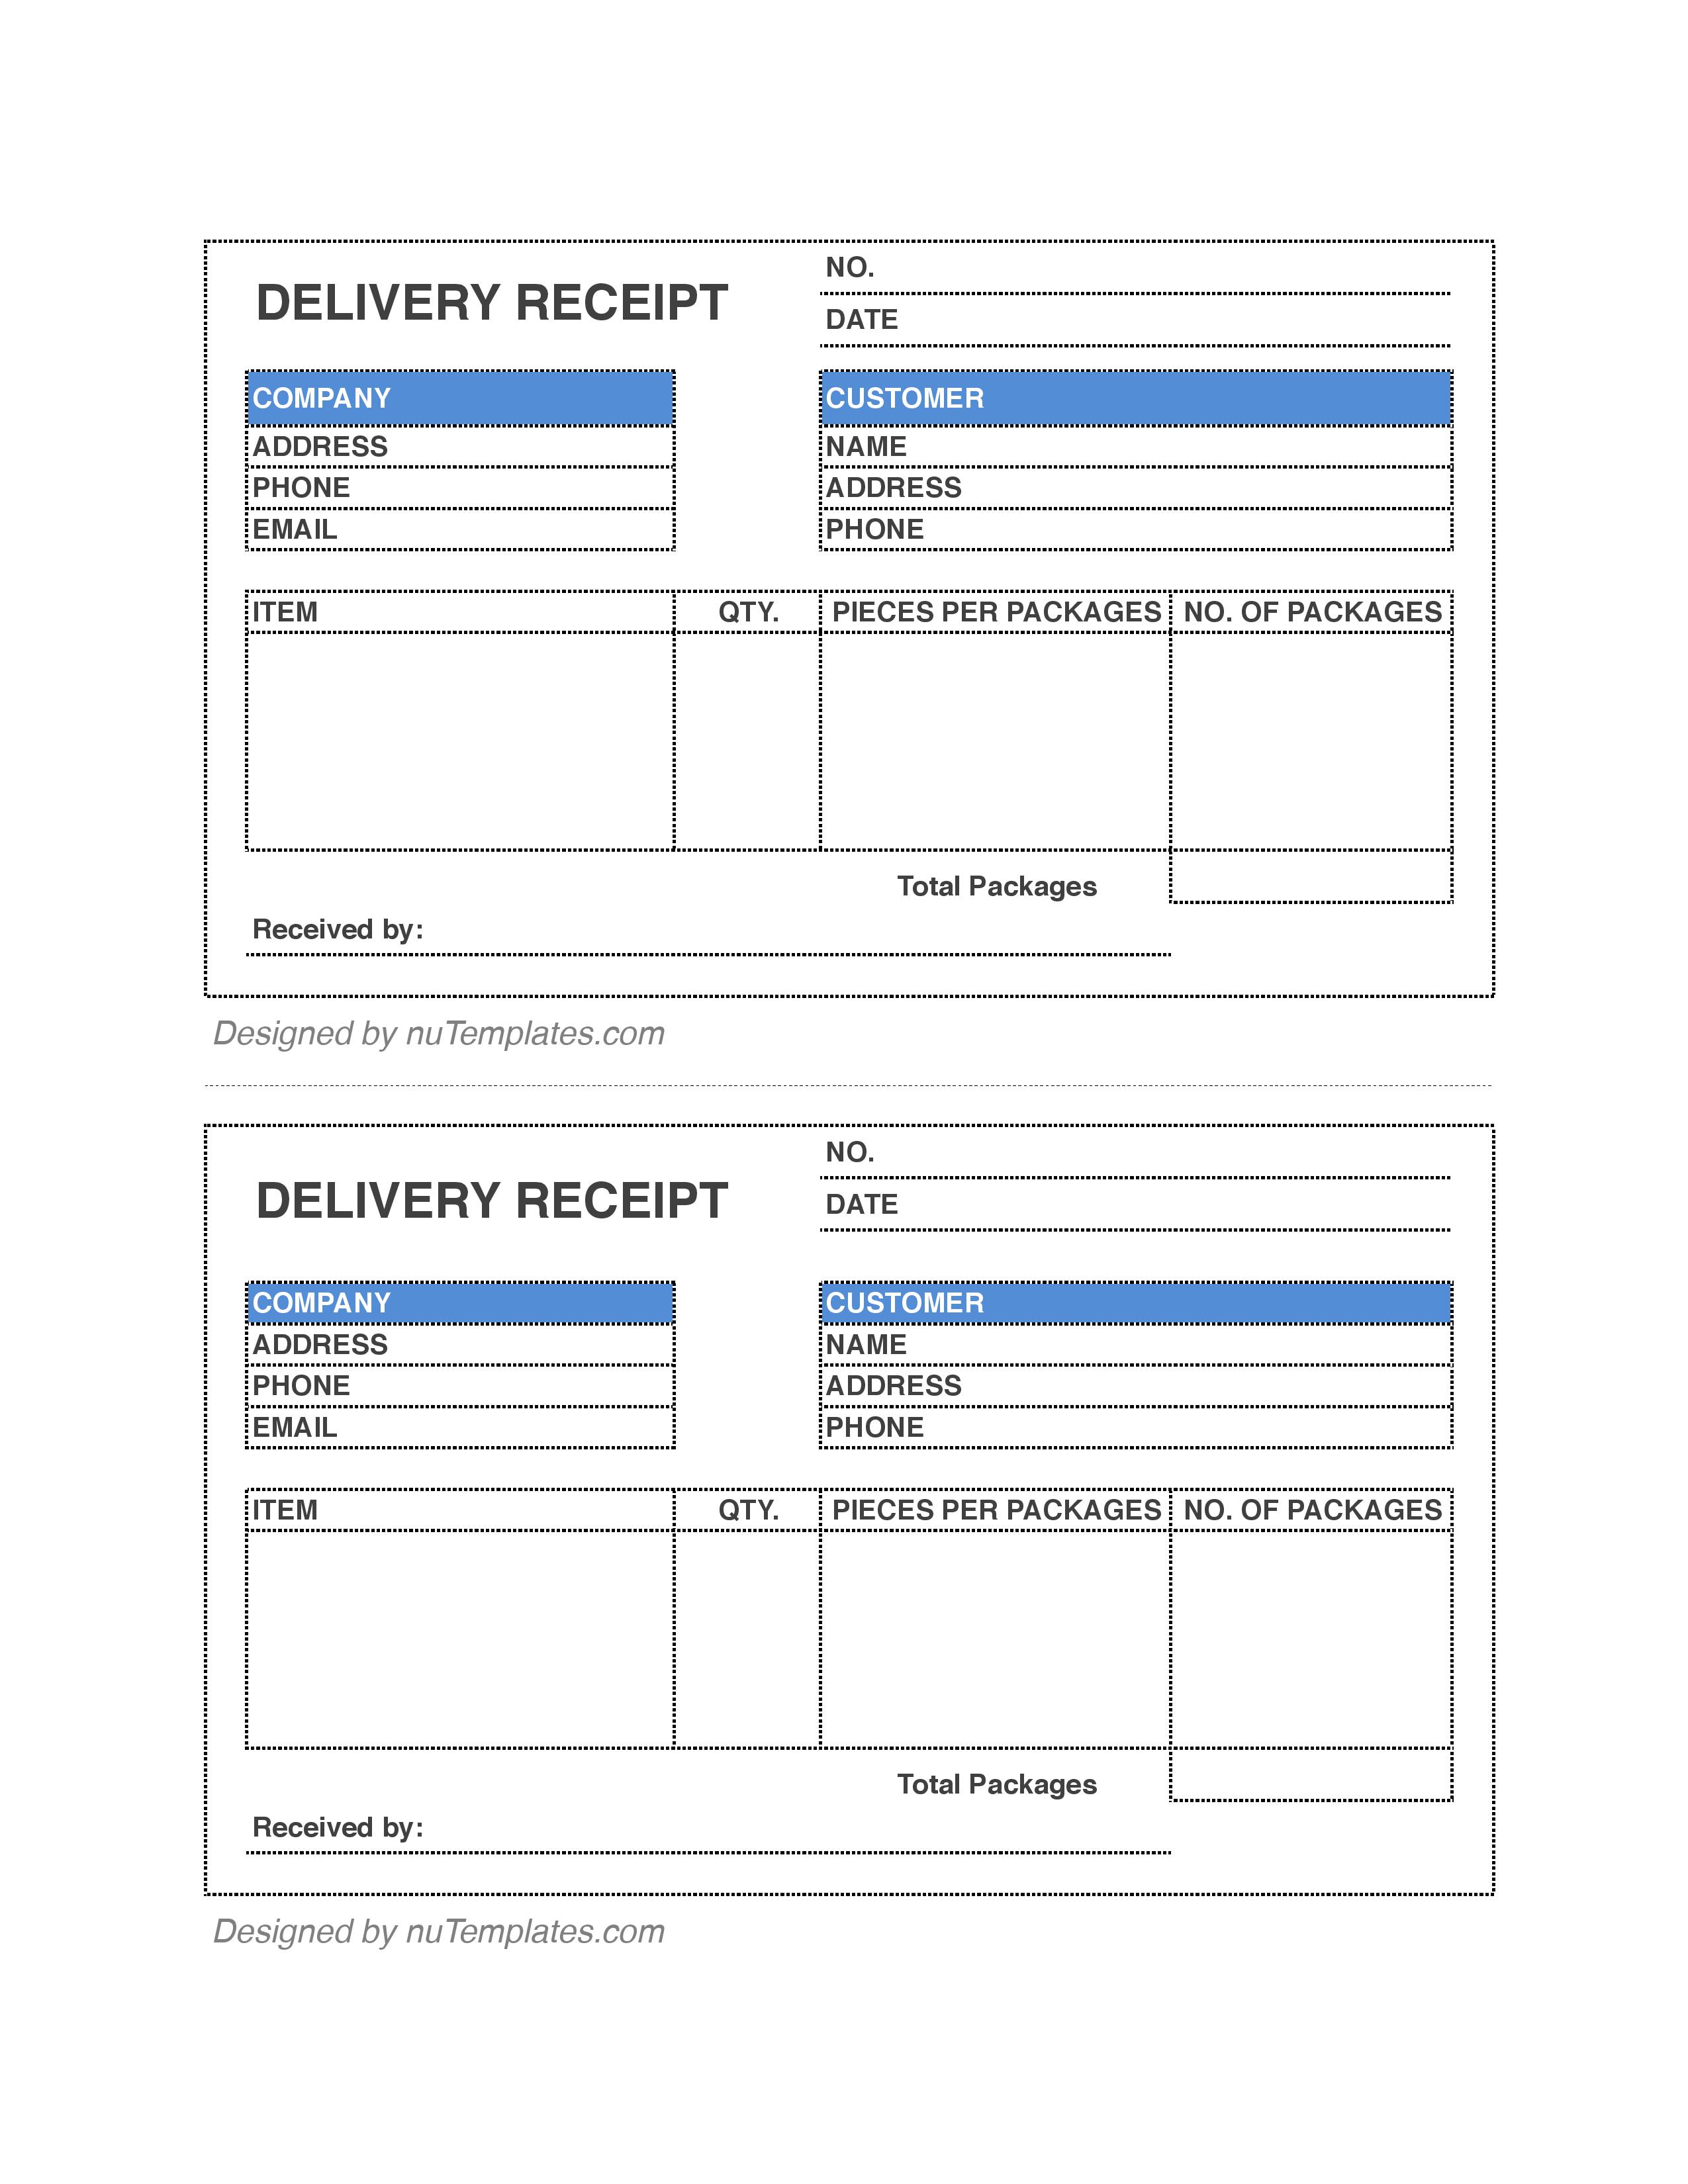 Delivery Receipt Template Delivery Receipts nuTemplates